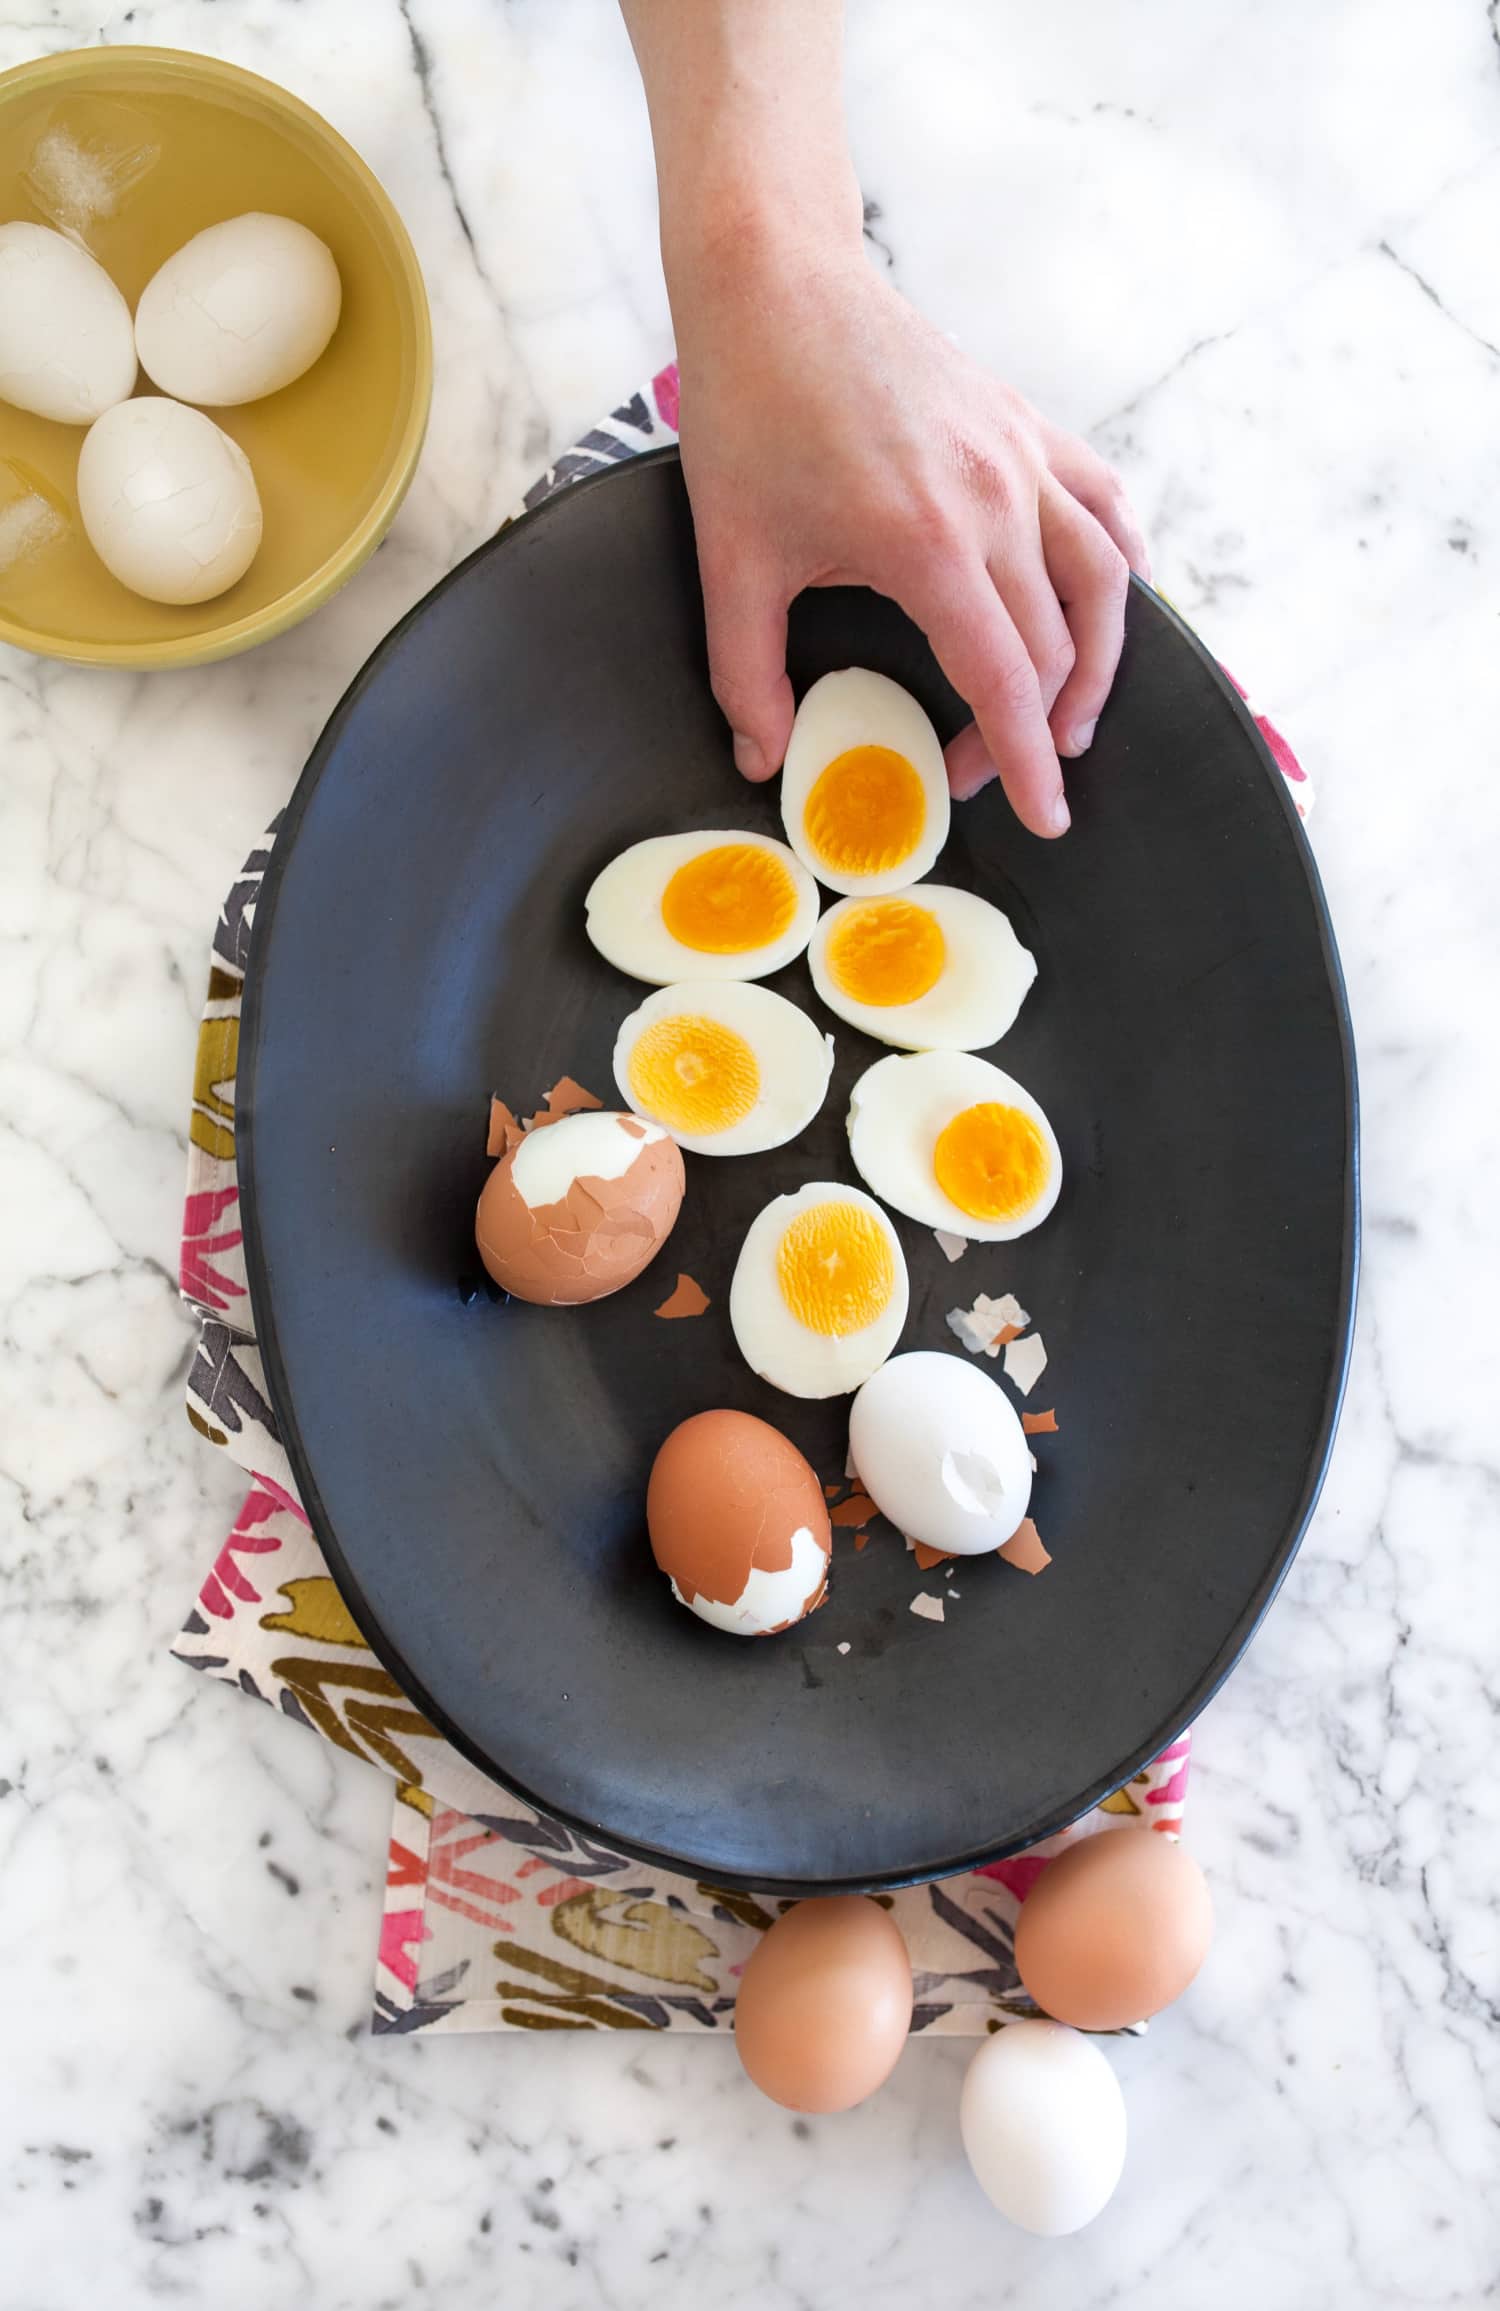 How To Hard Boil Eggs Perfectly Every Time | Kitchn